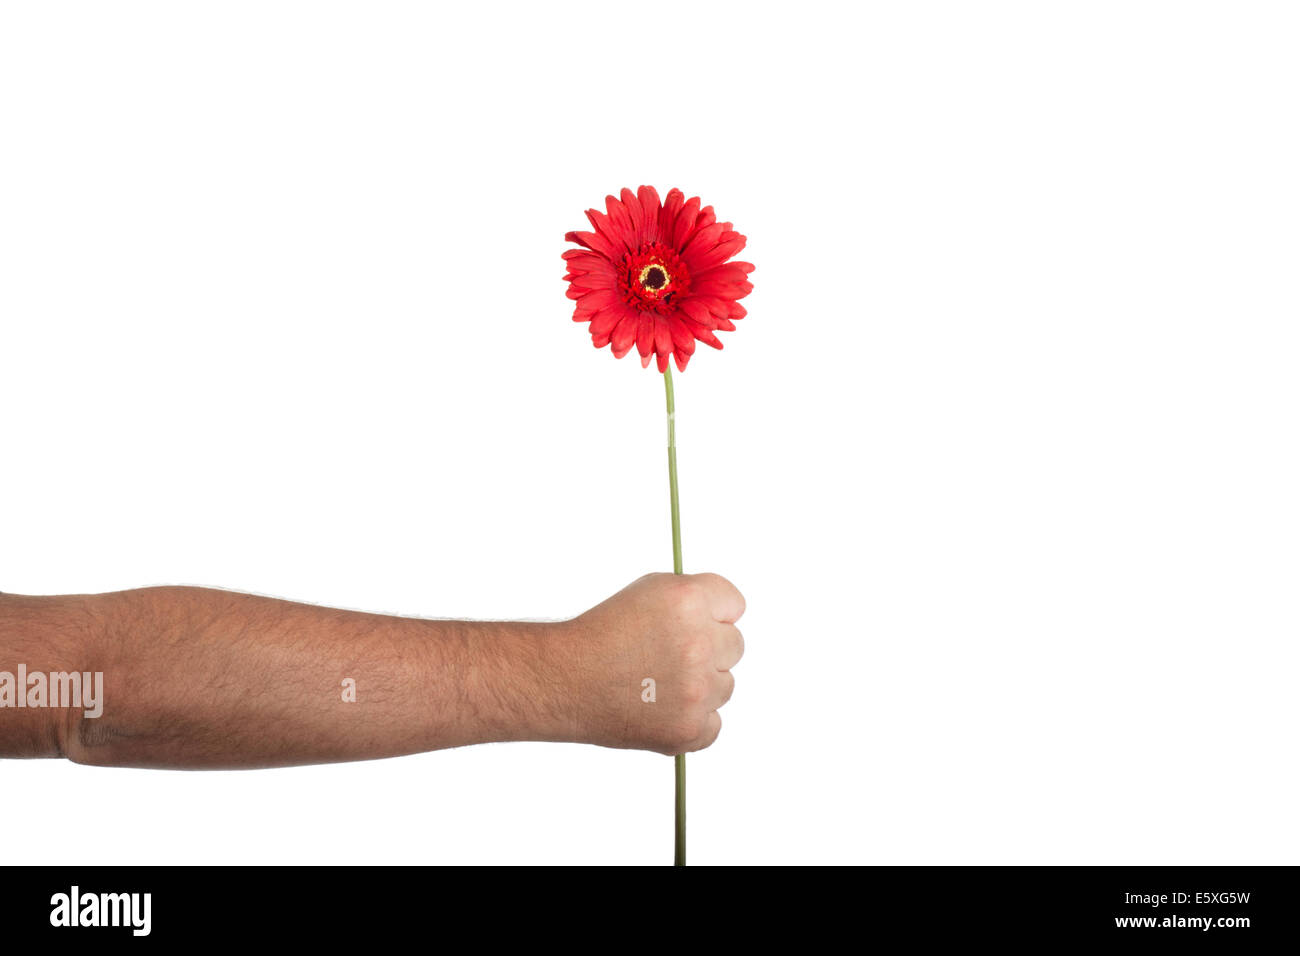 Funny floral tribute Stock Photo